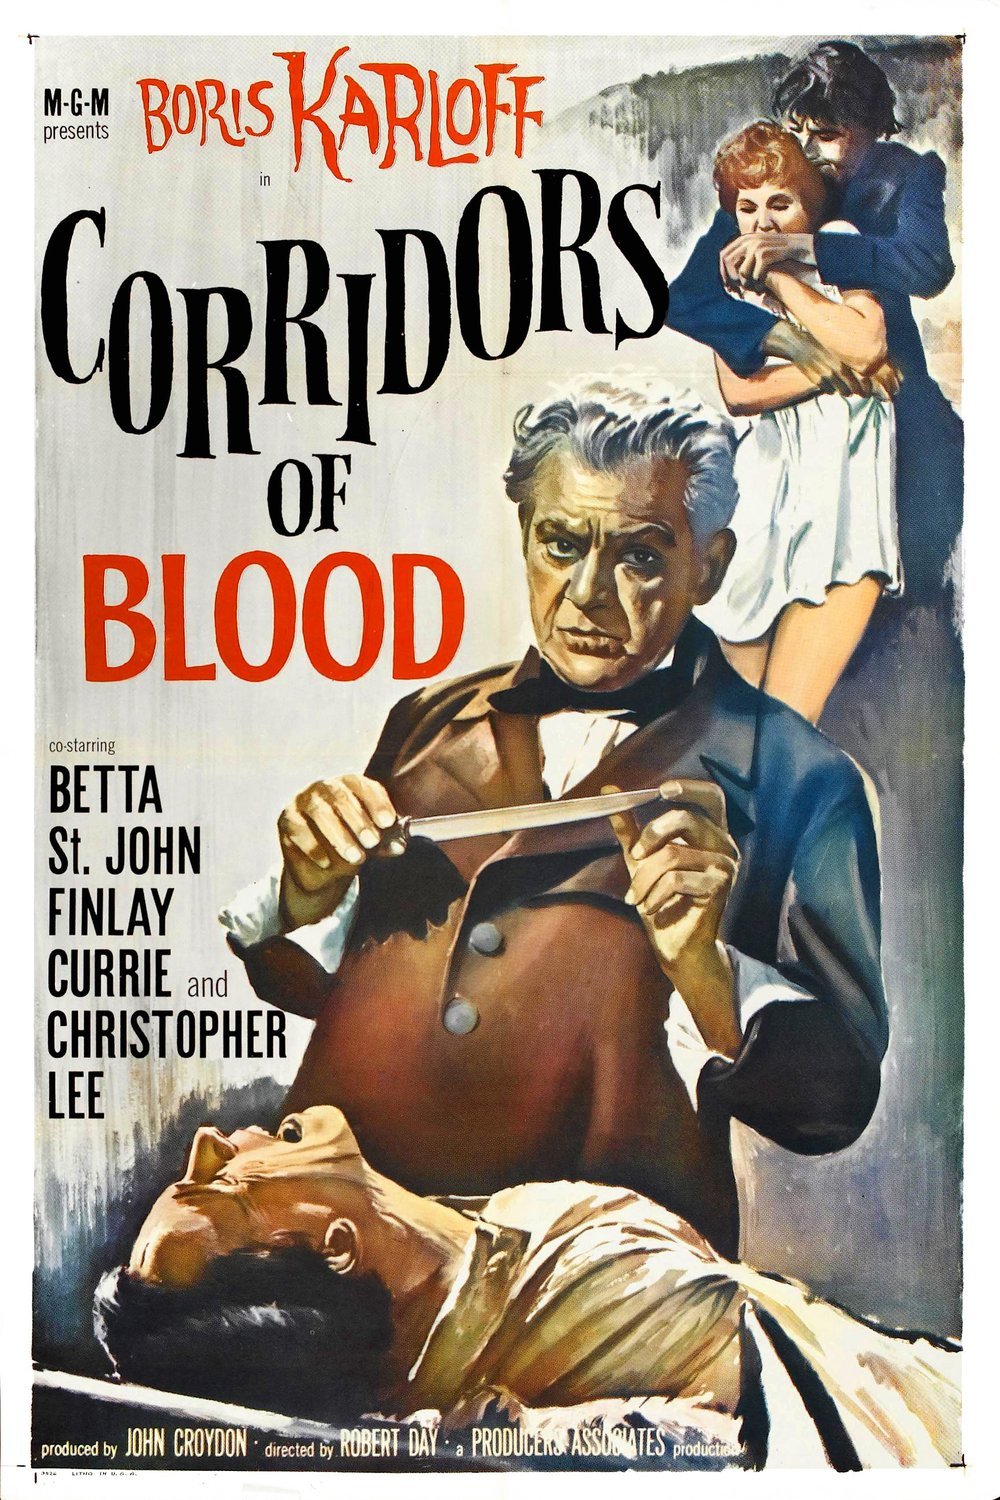 Poster of the movie Corridors of Blood